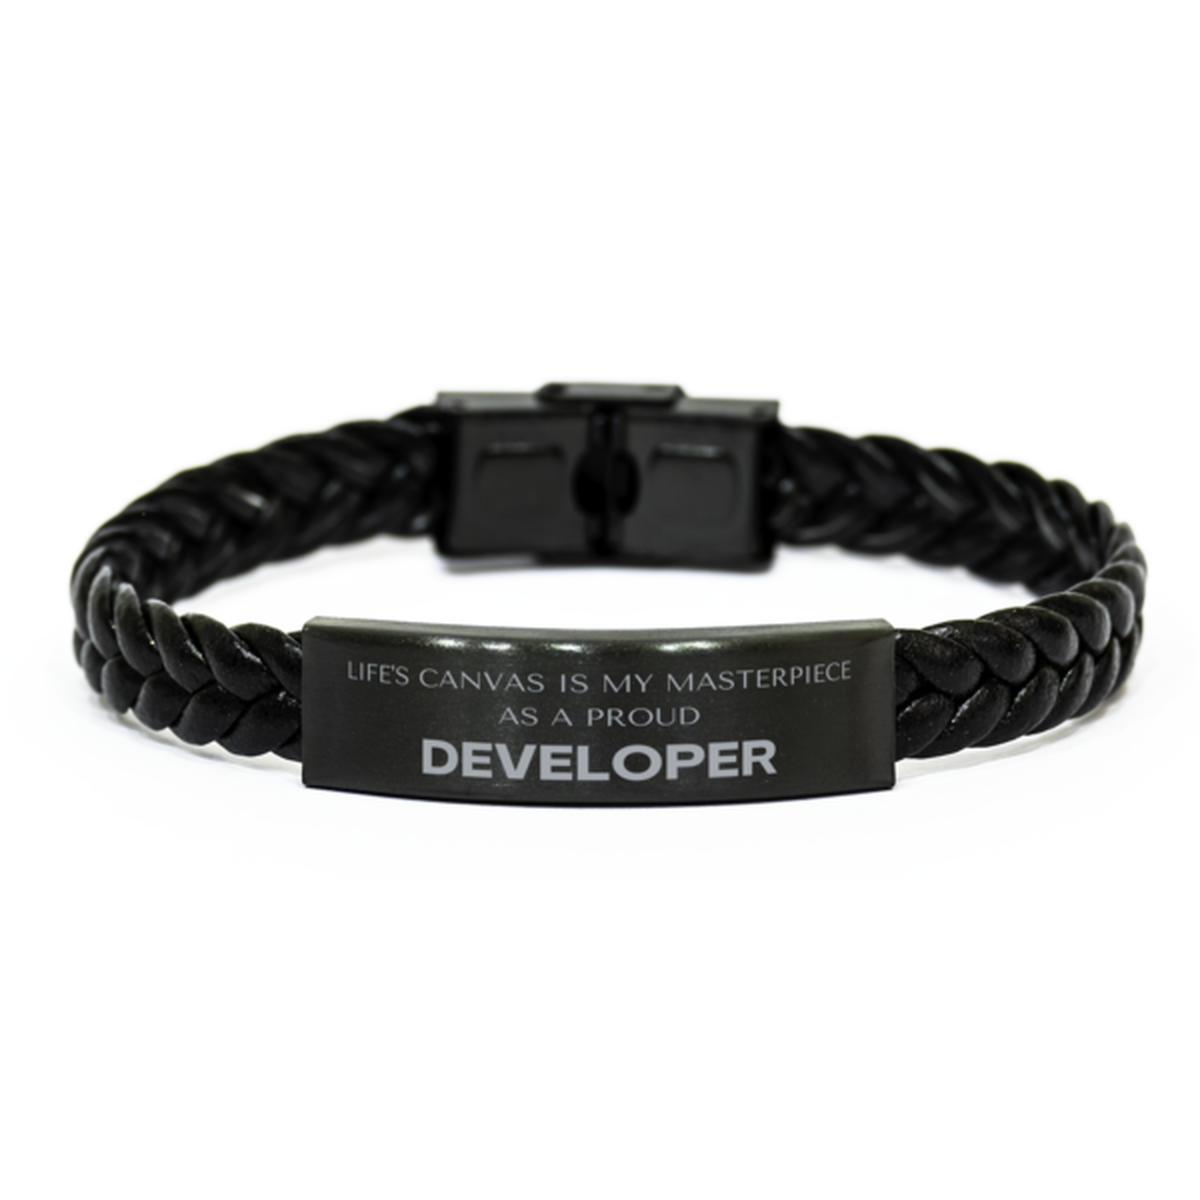 Proud Developer Gifts, Life's canvas is my masterpiece, Epic Birthday Christmas Unique Braided Leather Bracelet For Developer, Coworkers, Men, Women, Friends